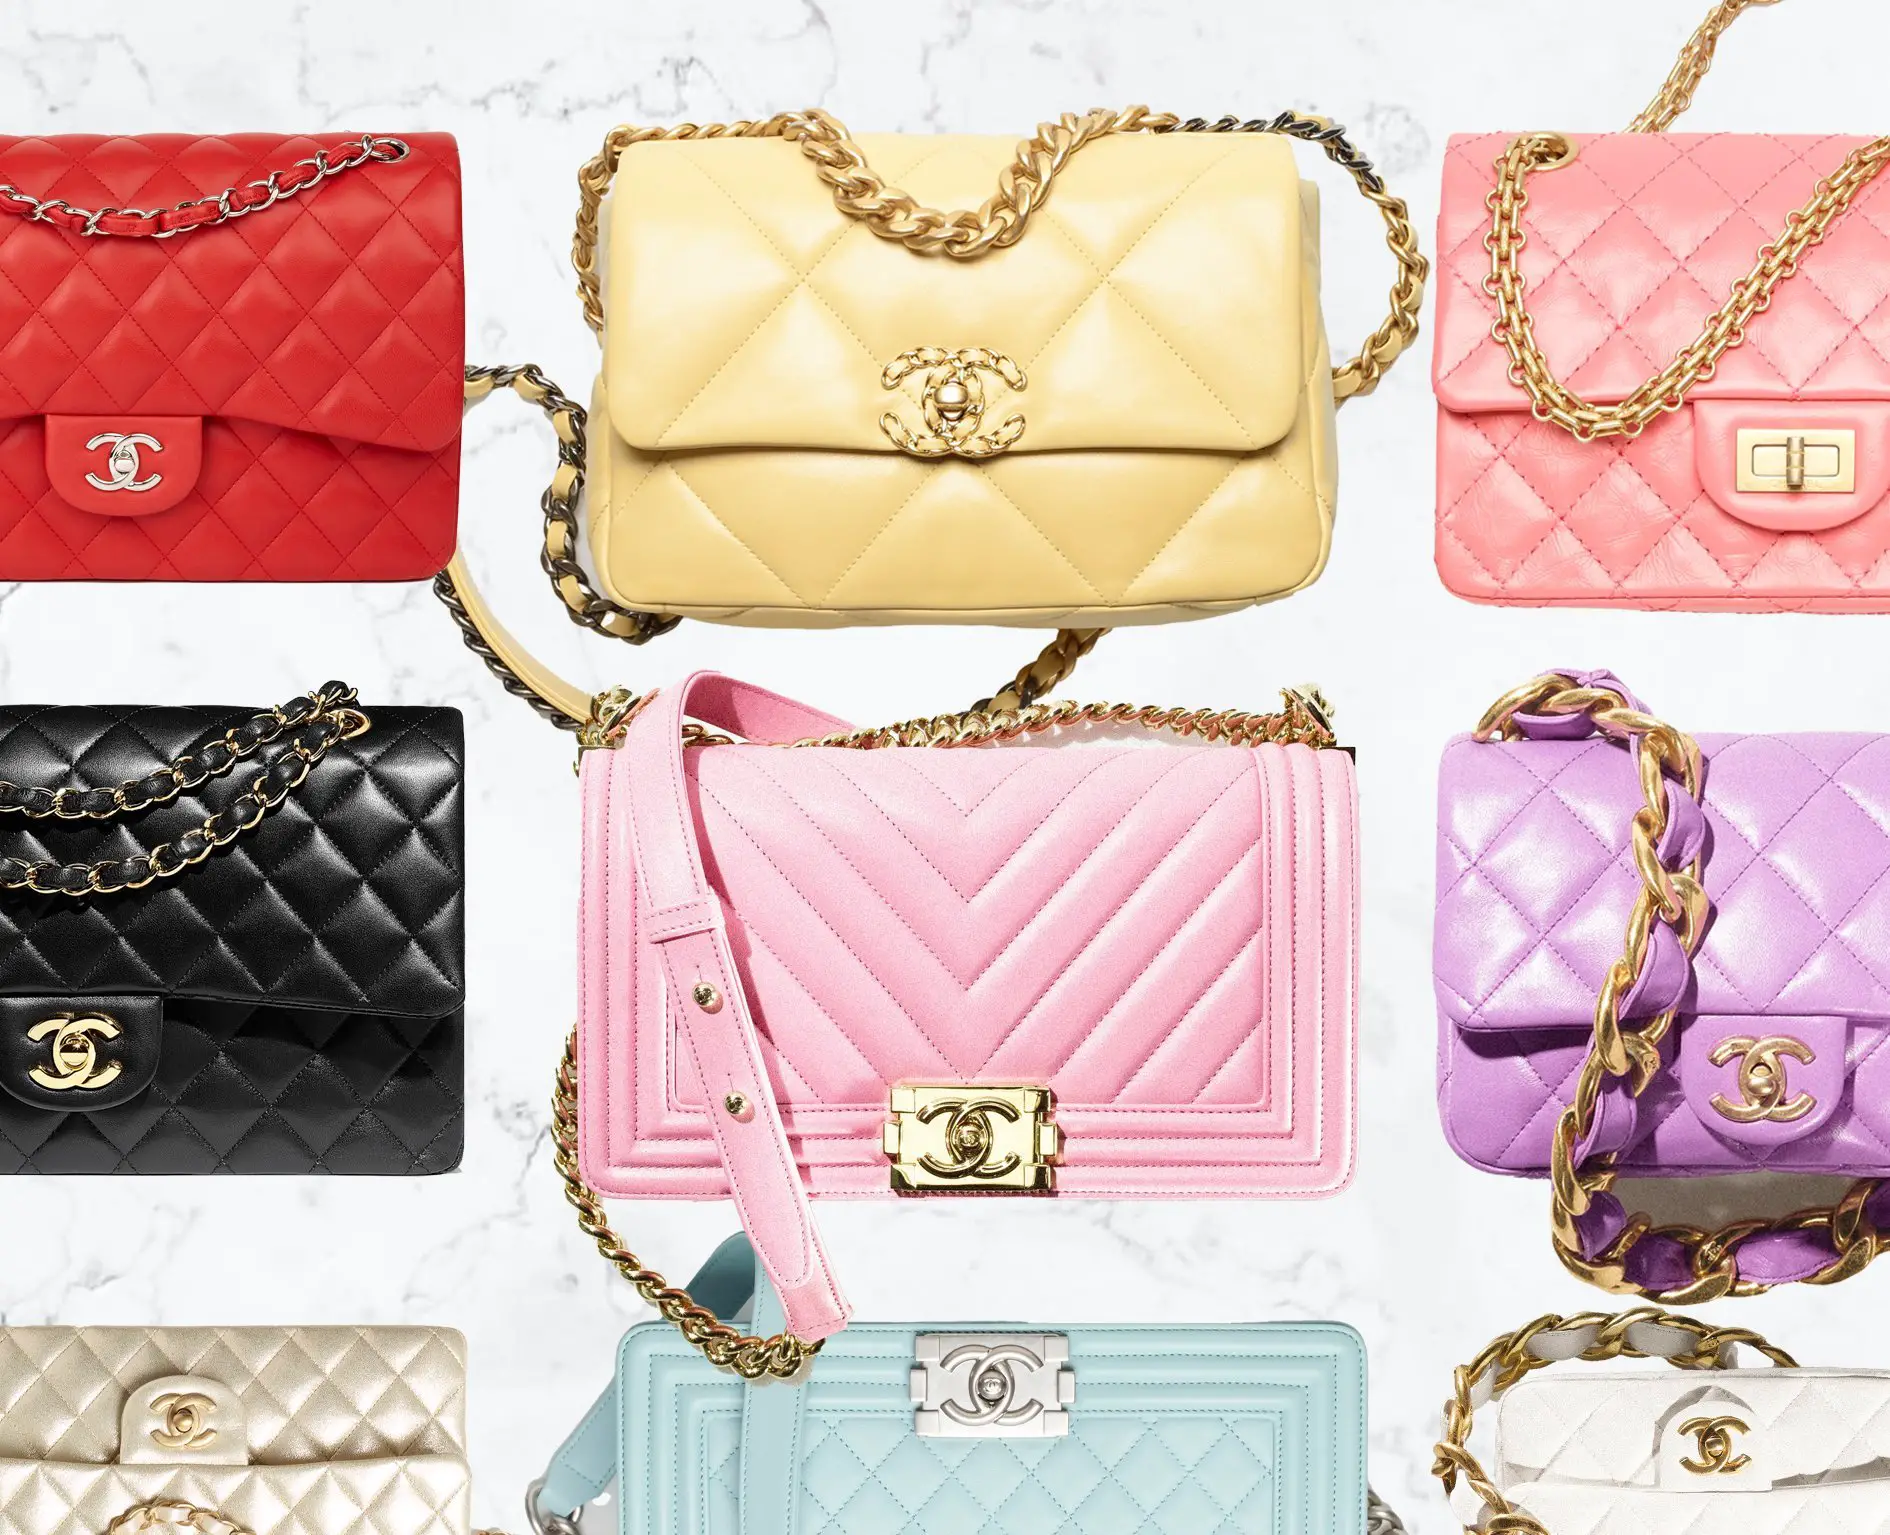 Which Chanel Bag To Buy First? Here Are The Best Picks